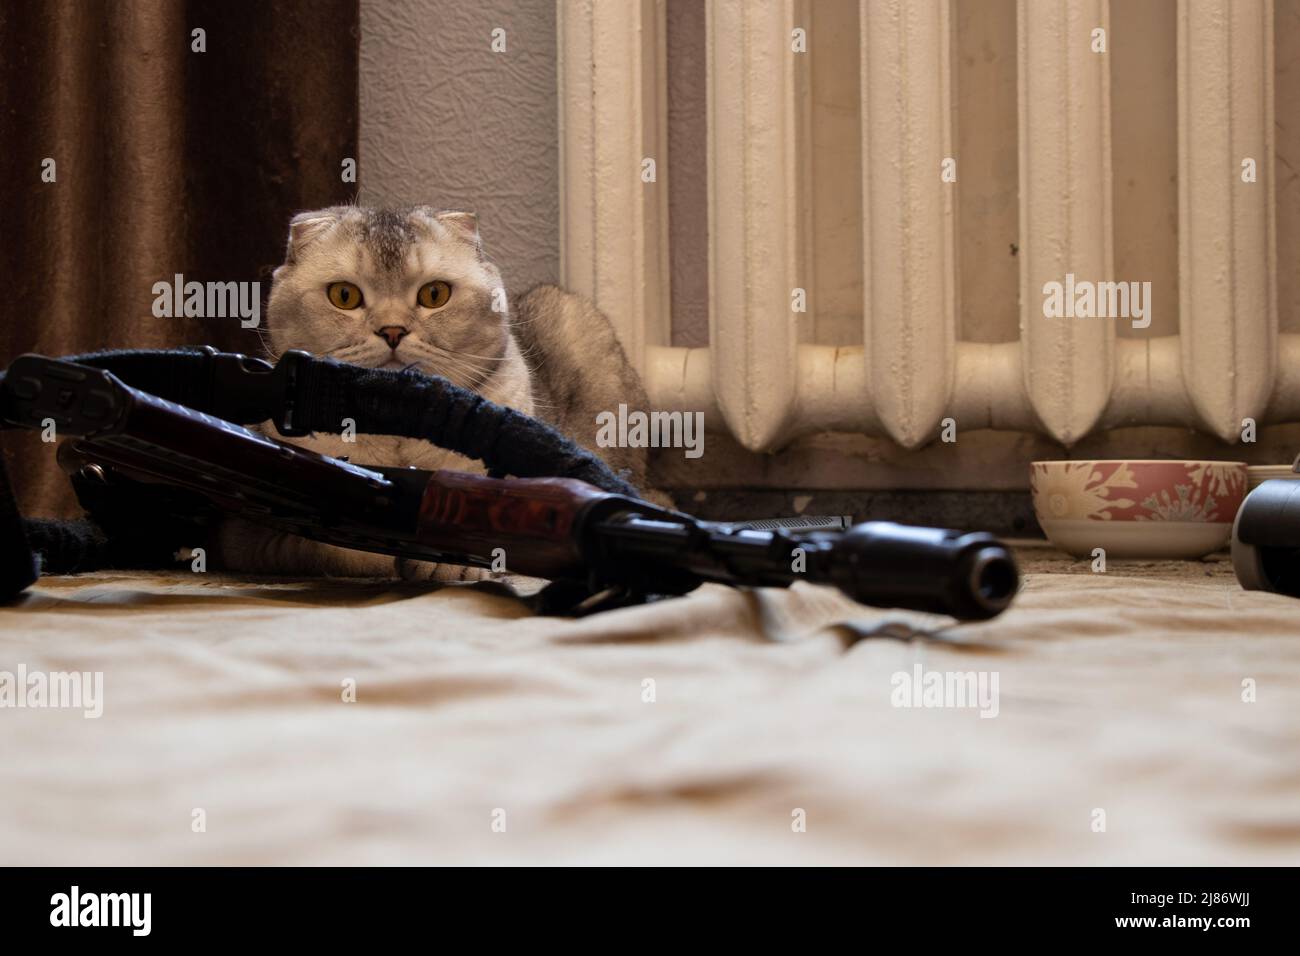 A domestic cat sits near a military machine gun and a pistol in a residential building, house and order protection, military weapons and a cat, war in Stock Photo